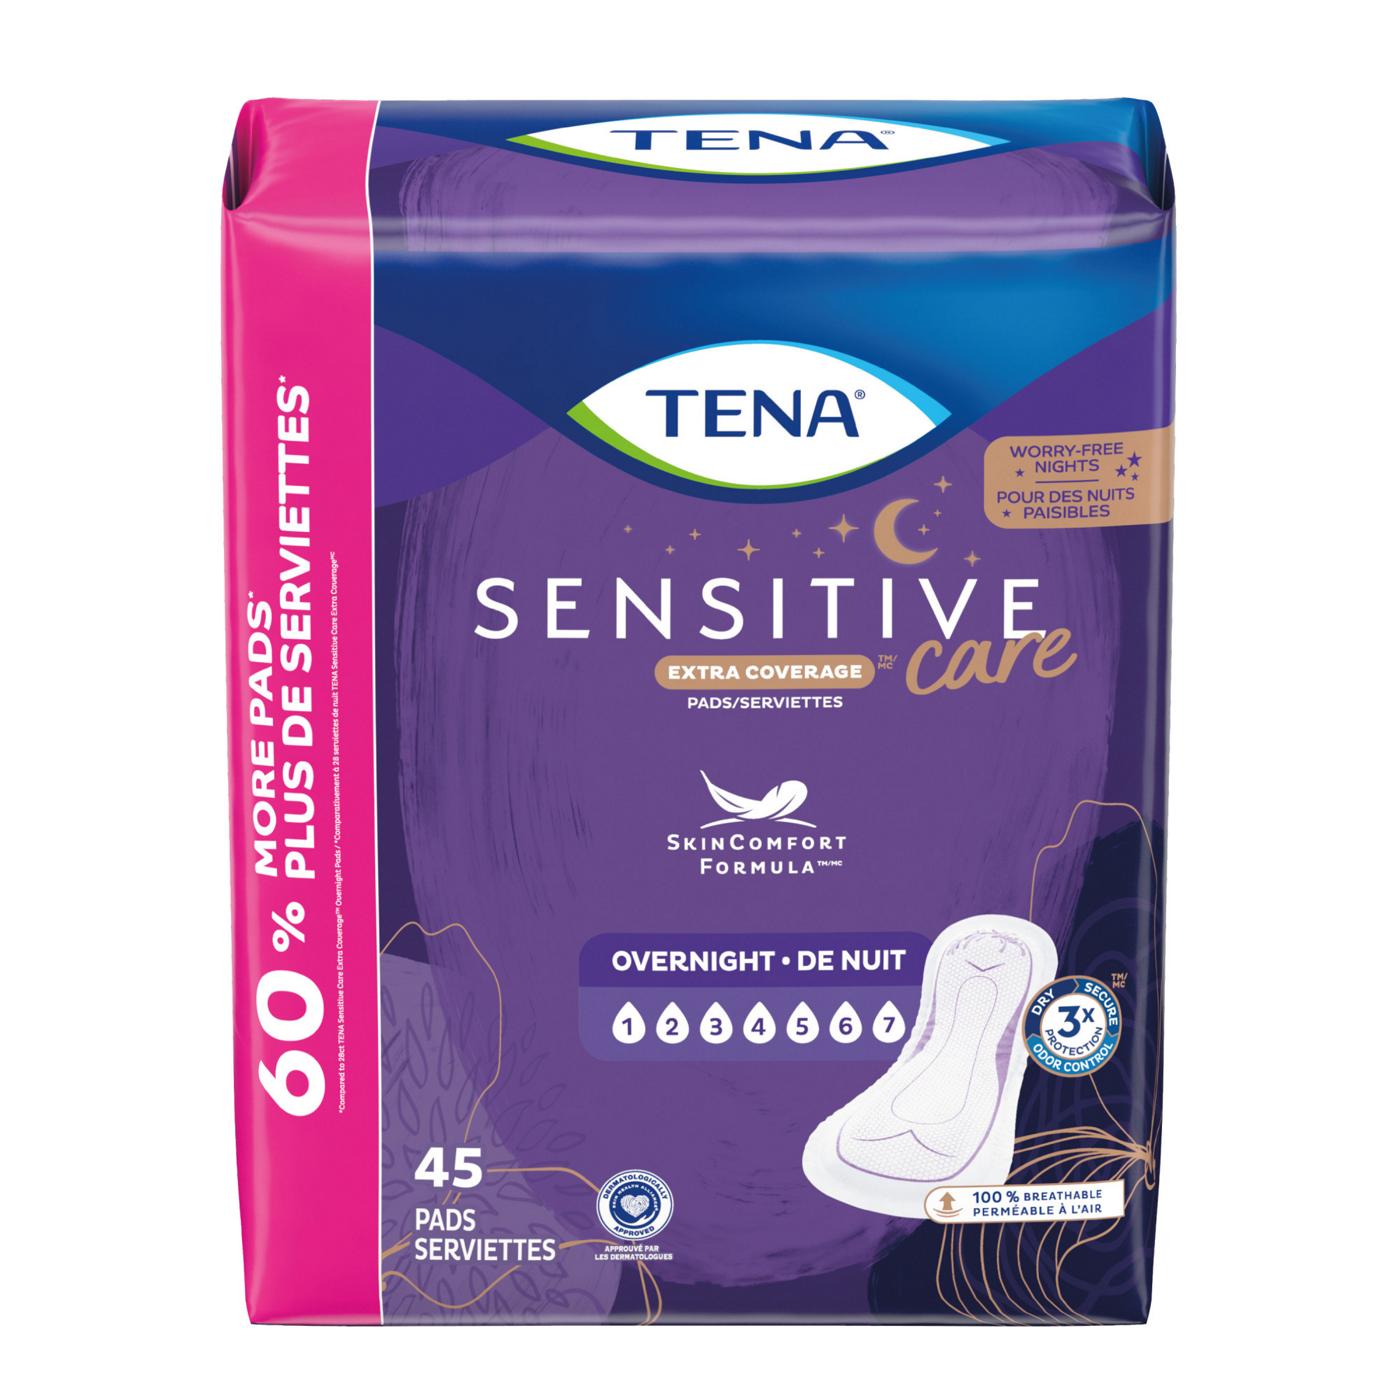 Tena Sensitive Care Extra Coverage Overnight Incontinence Pads; image 1 of 9